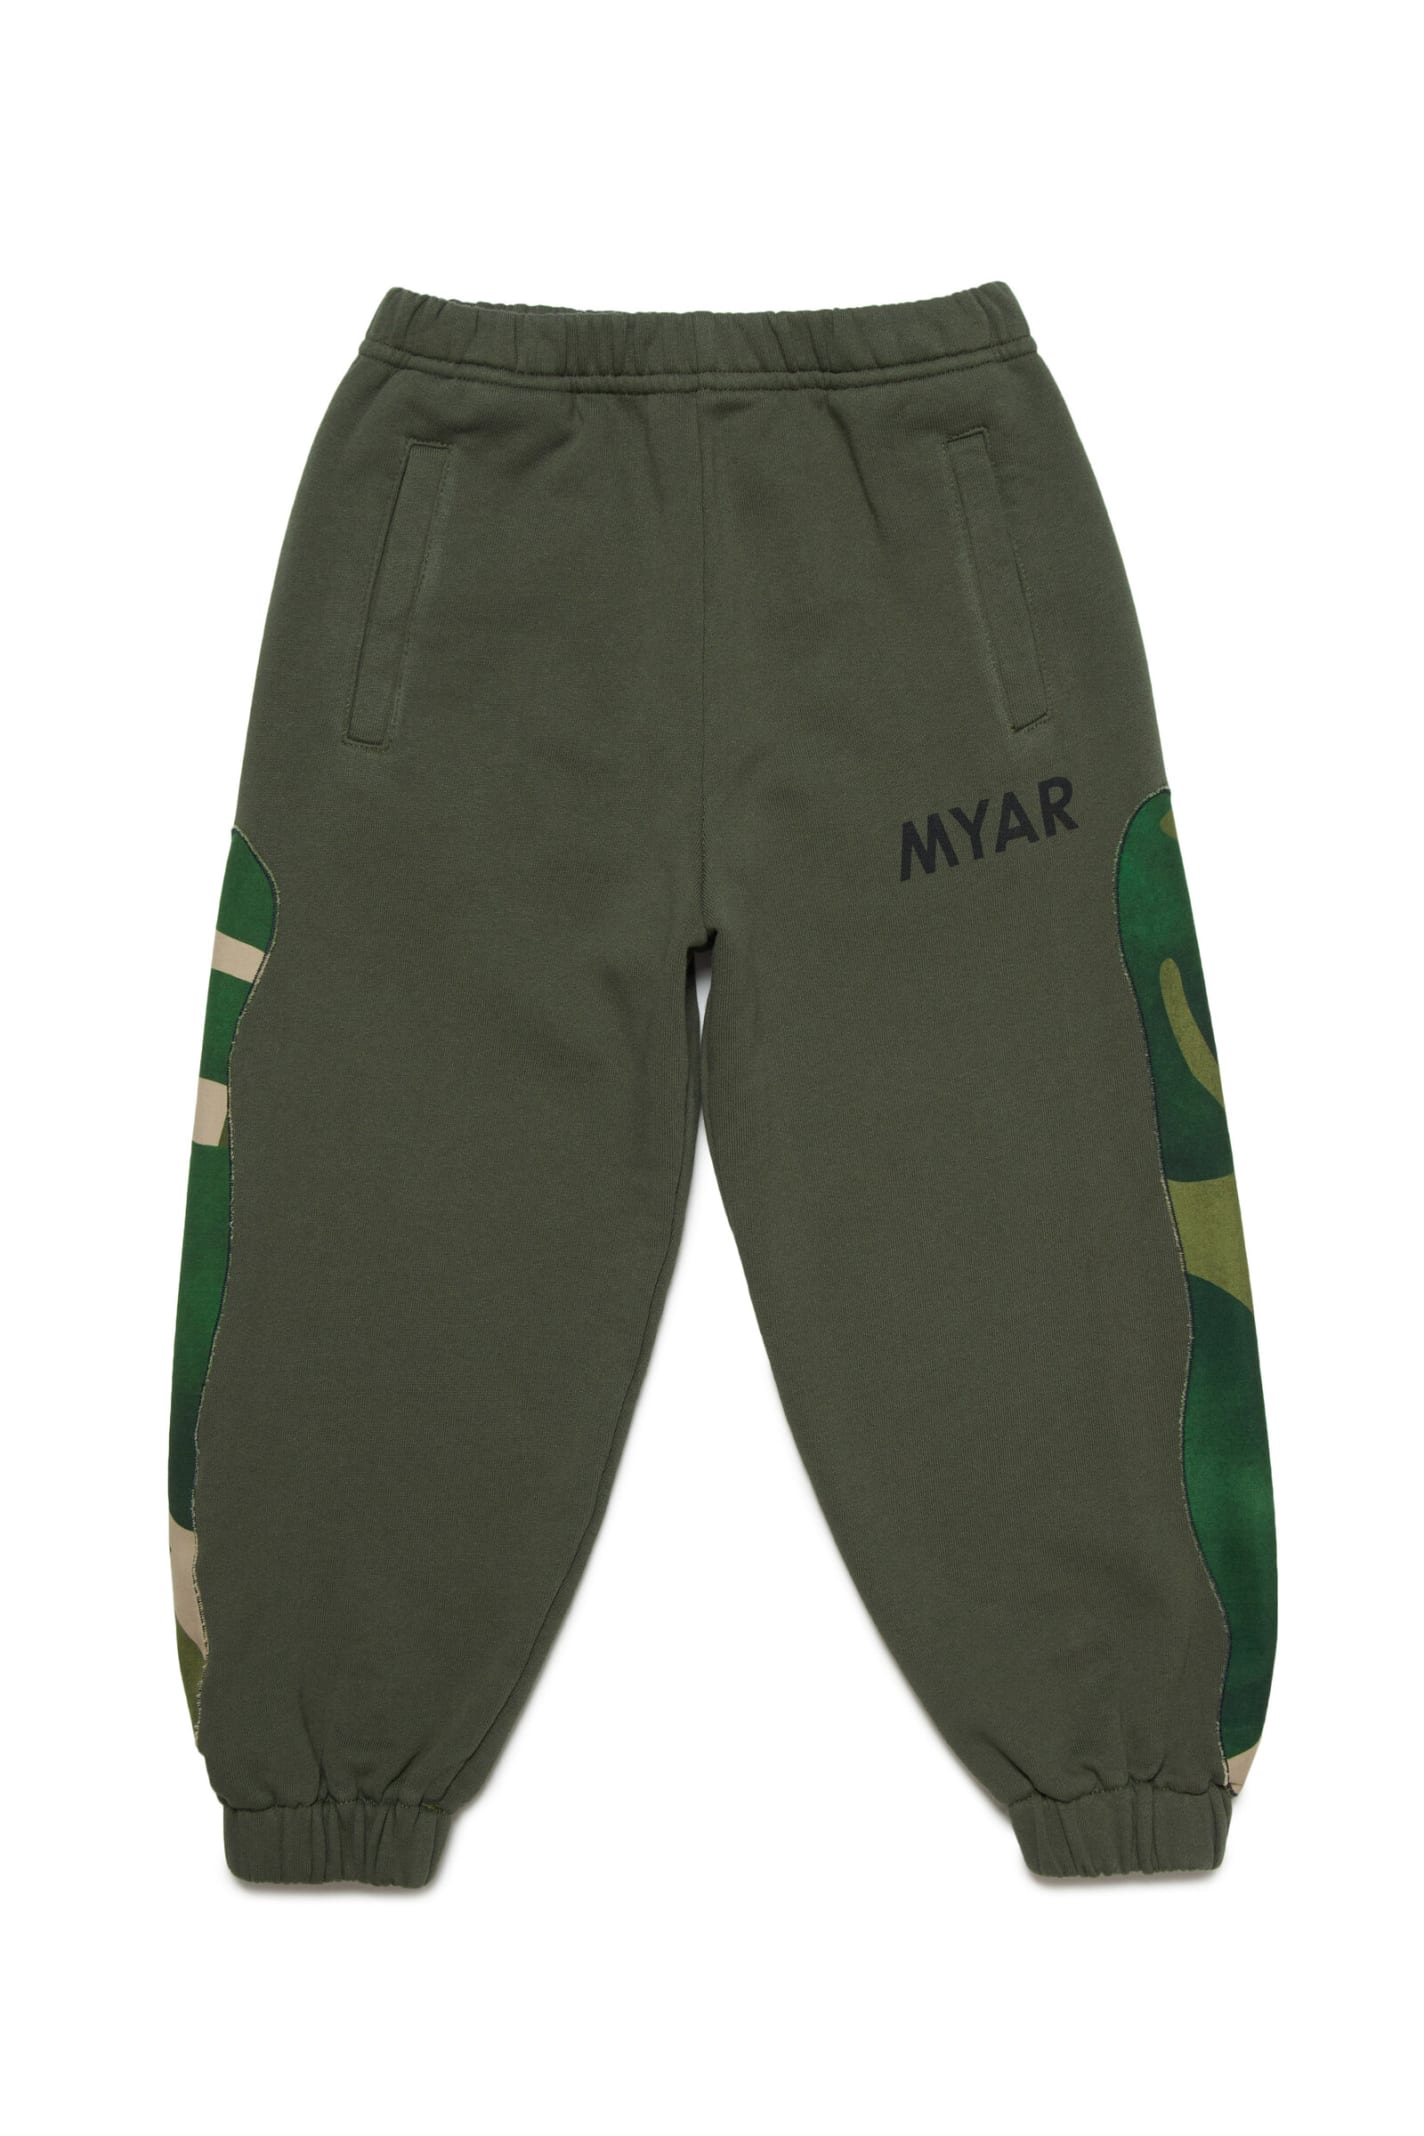 MYAR Myp10u Trousers Myar Plush Jogger Trousers With Rainforest Patterned Fabric Applications